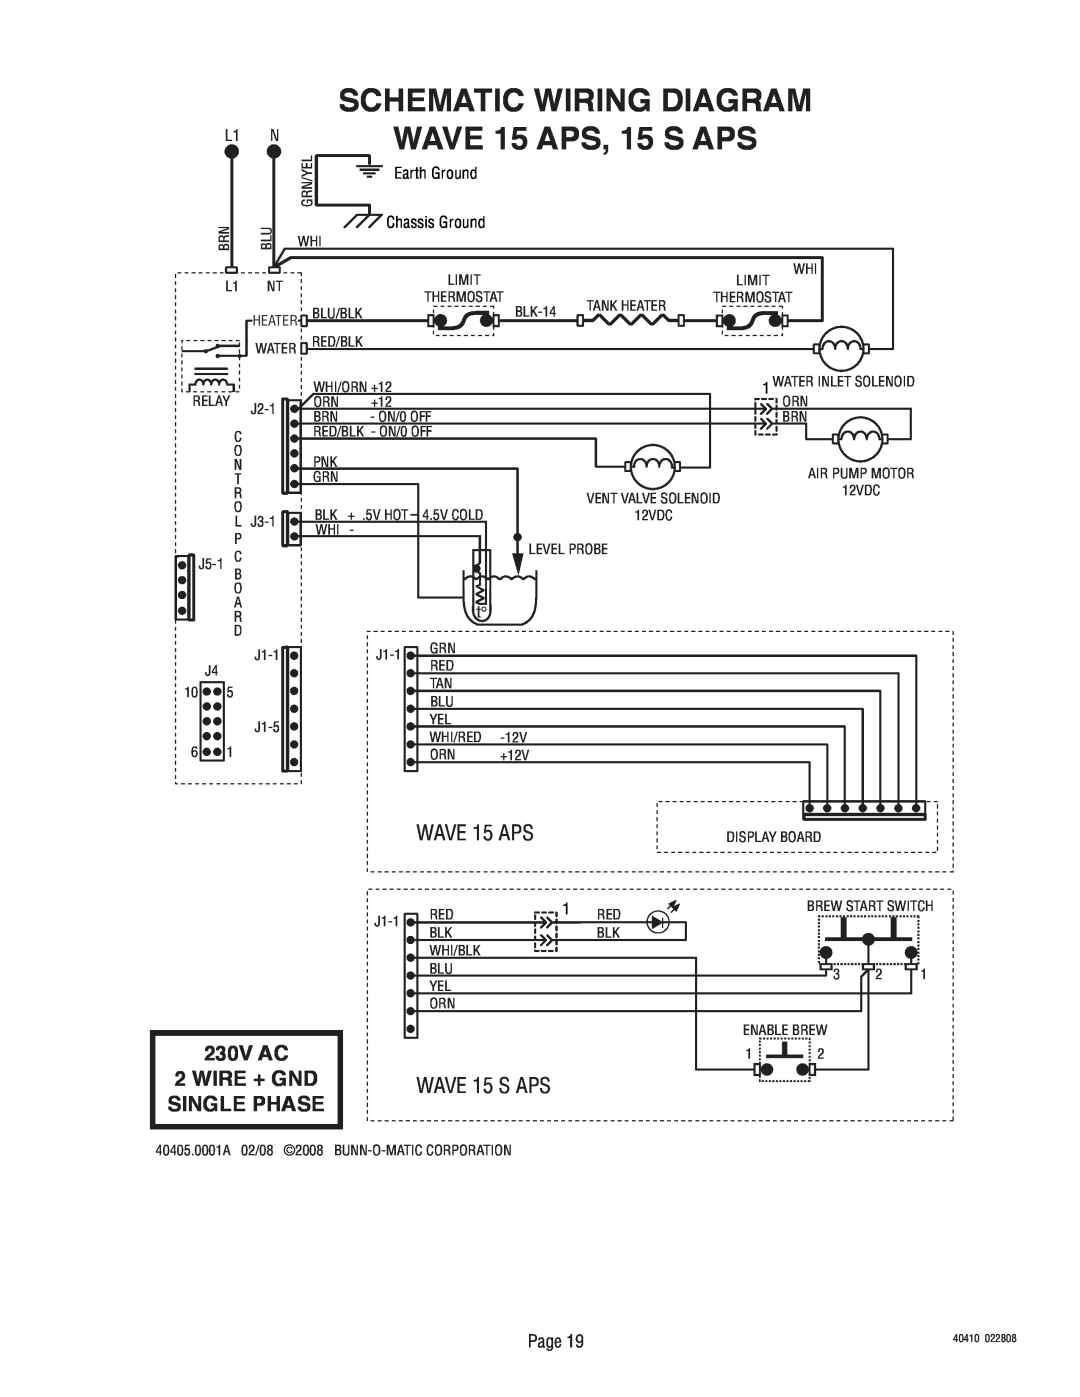 Bunn Smart Wave Silver Series Schematic Wiring Diagram, WAVE 15 APS, 15 S APS, 230V AC 2 WIRE + GND SINGLE PHASE, Page 